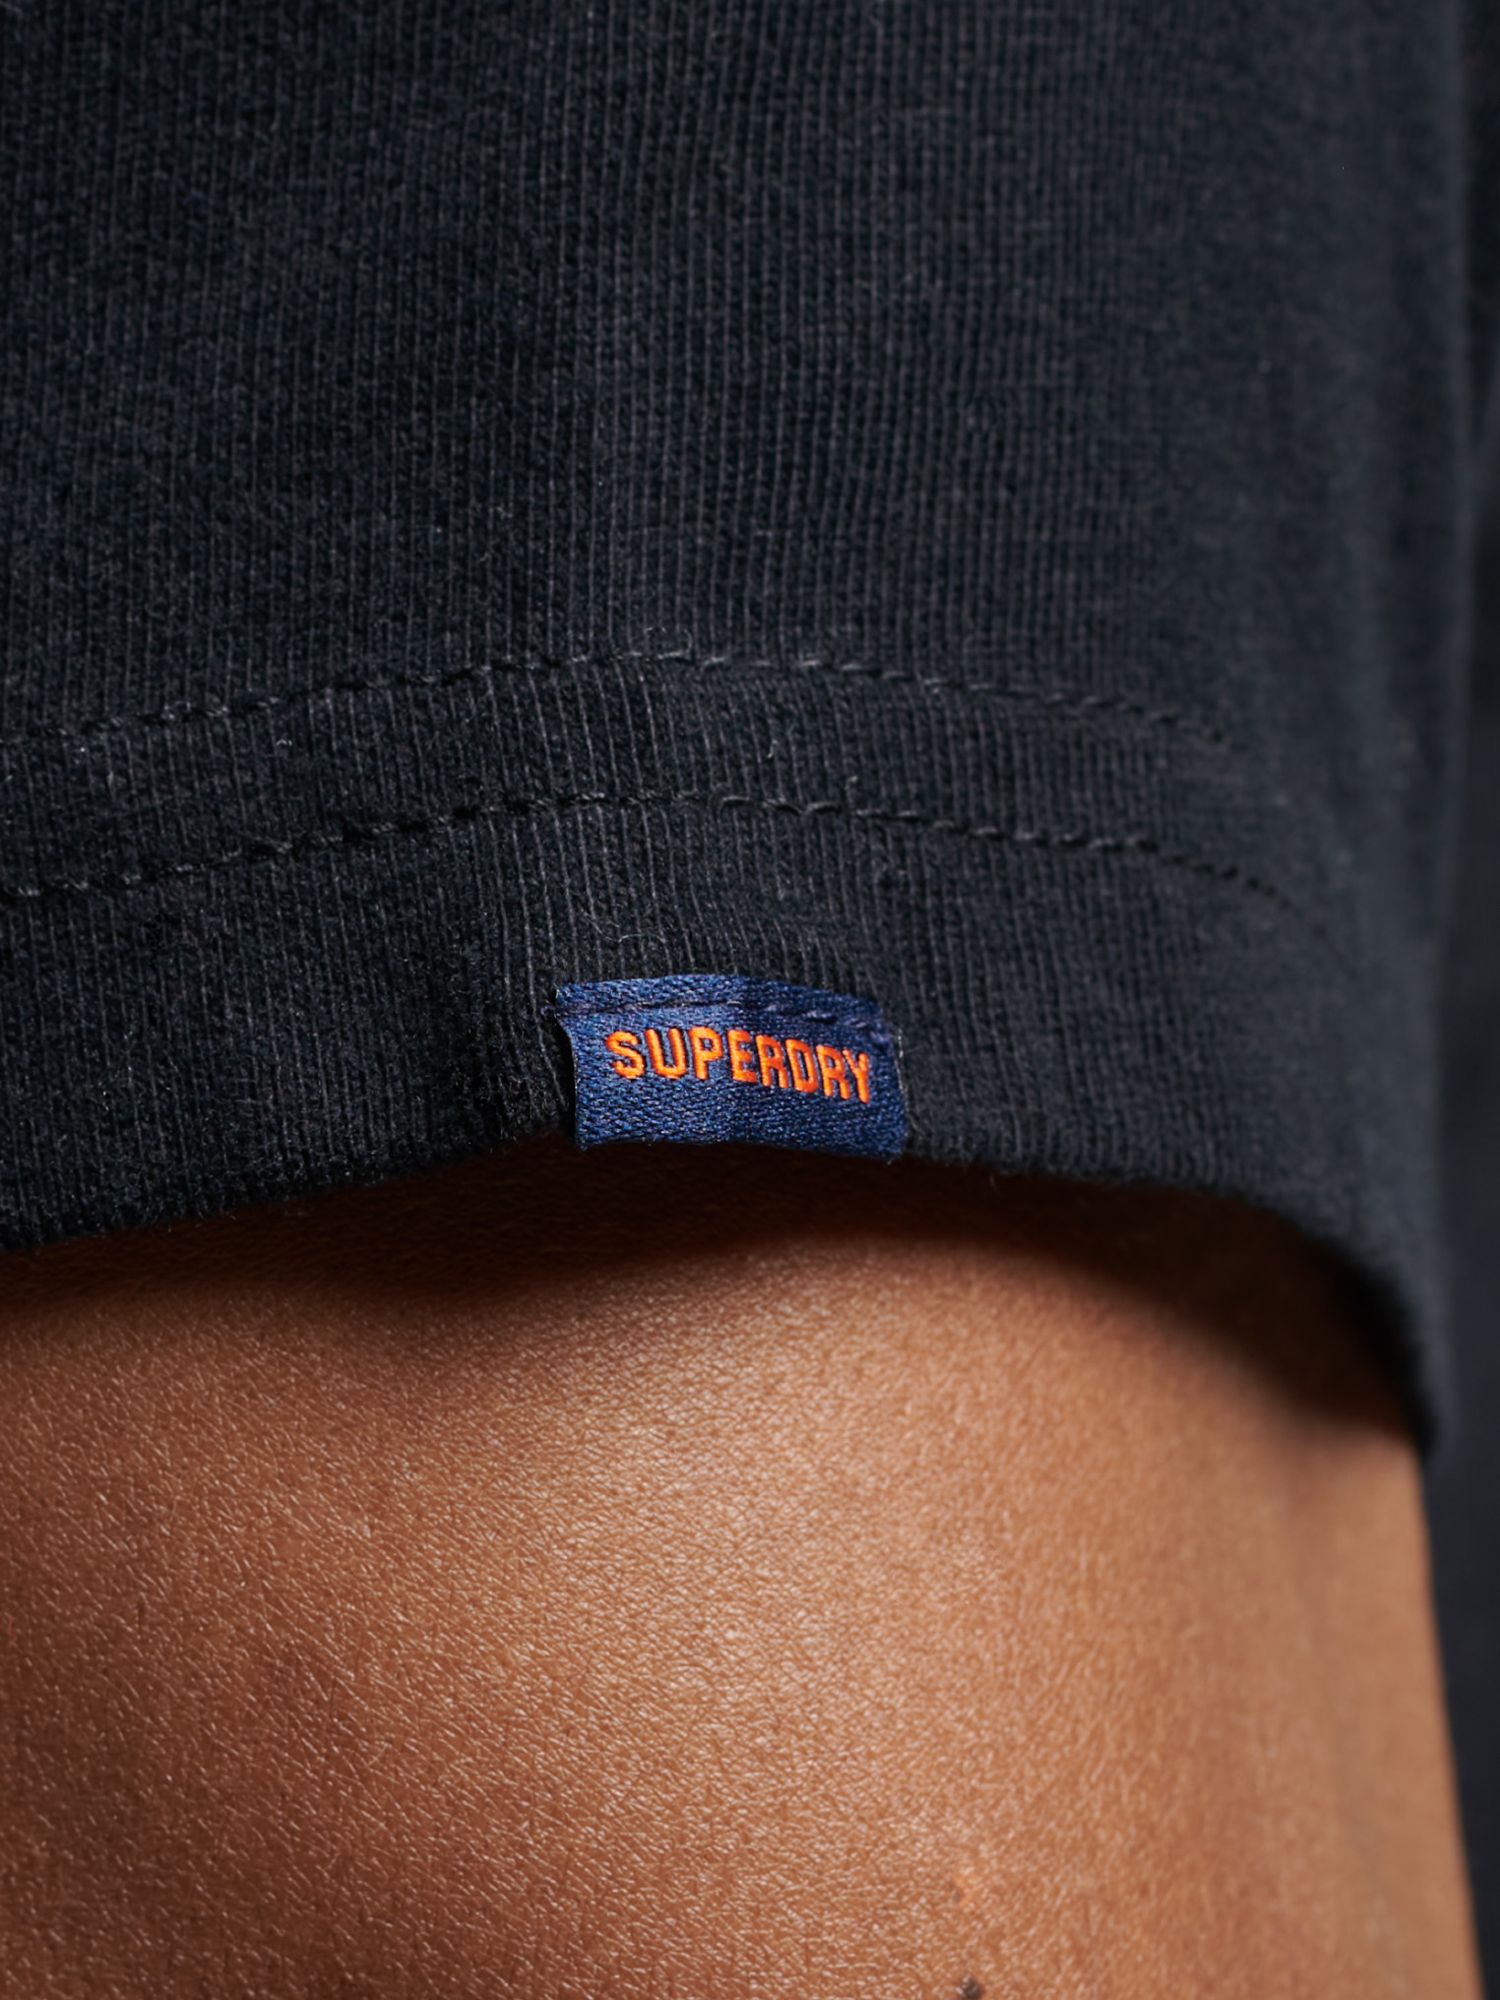 Buy Superdry Jersey Polo Shirt Online at johnlewis.com